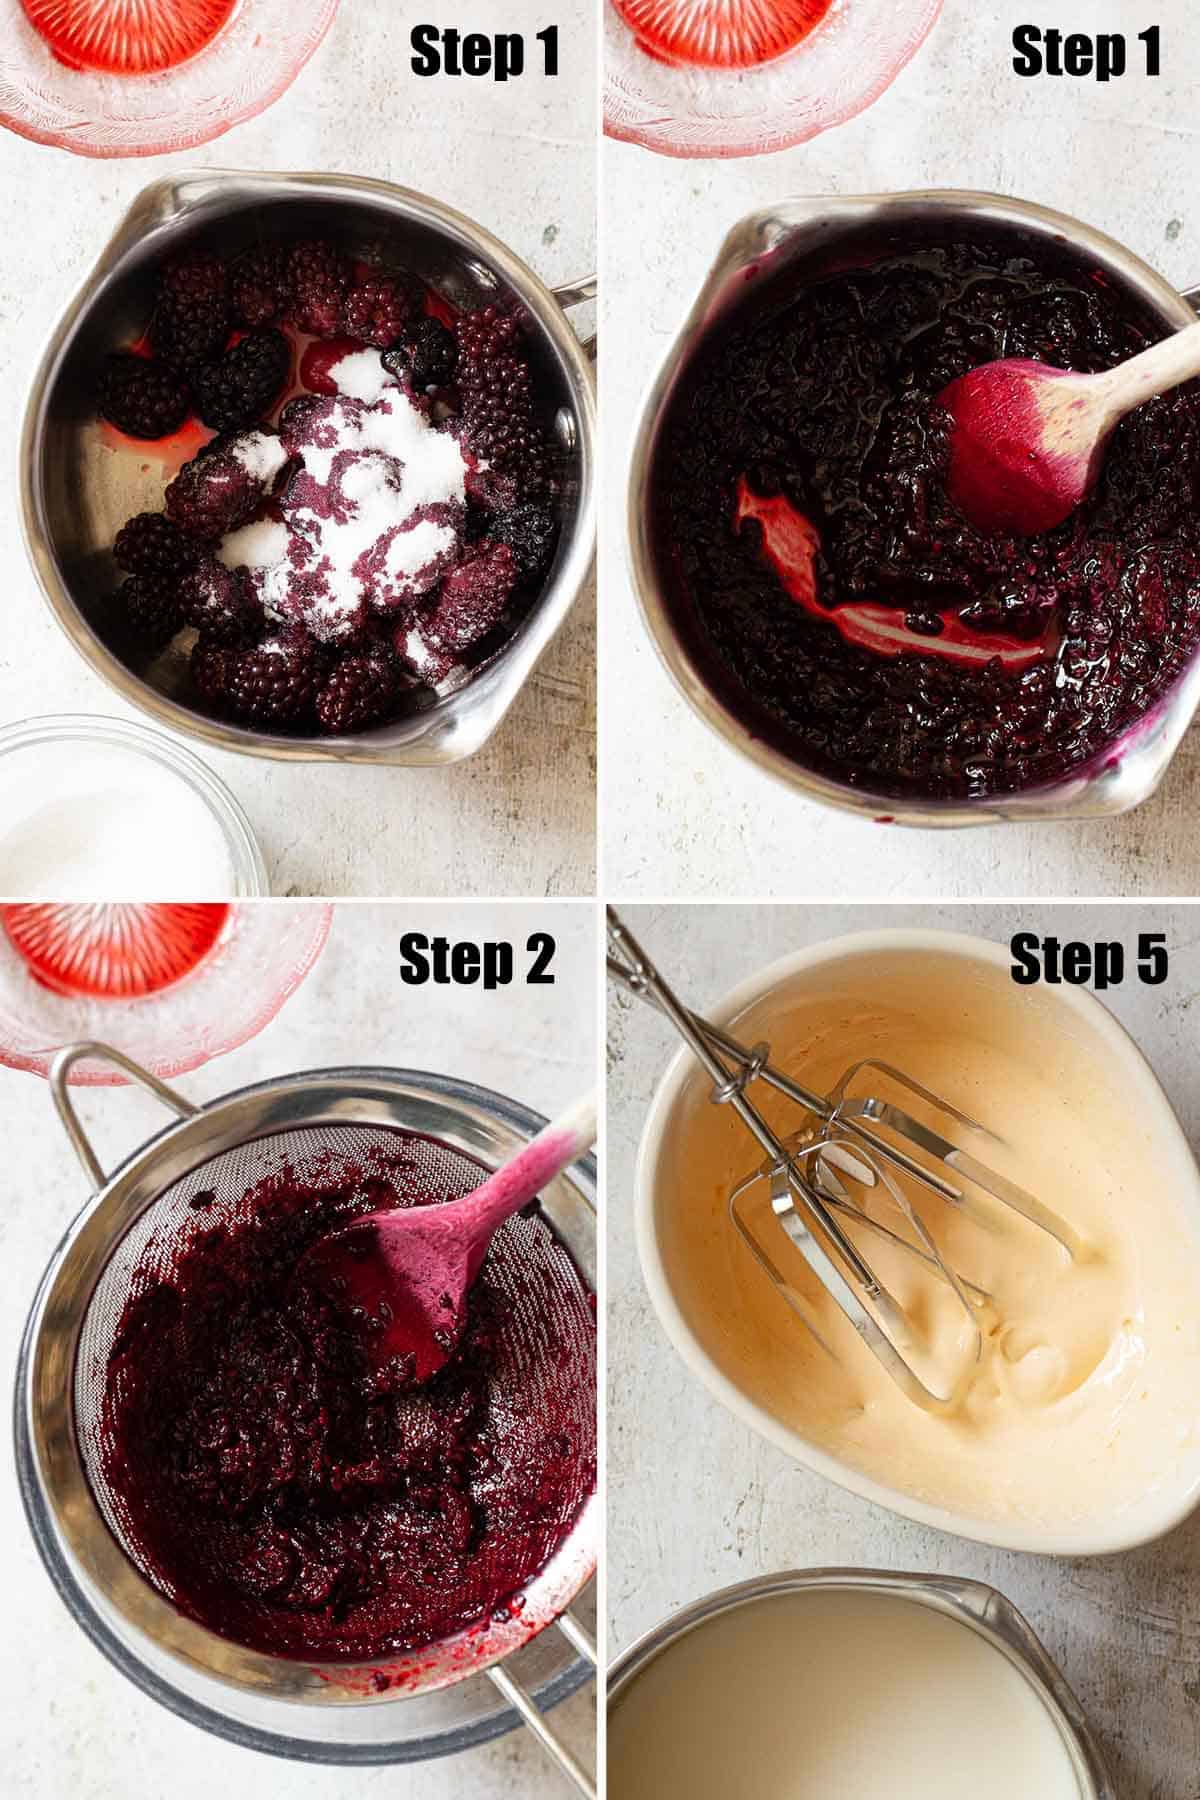 Collage of images showing fruit compote being made and eggs whipped up for custard.